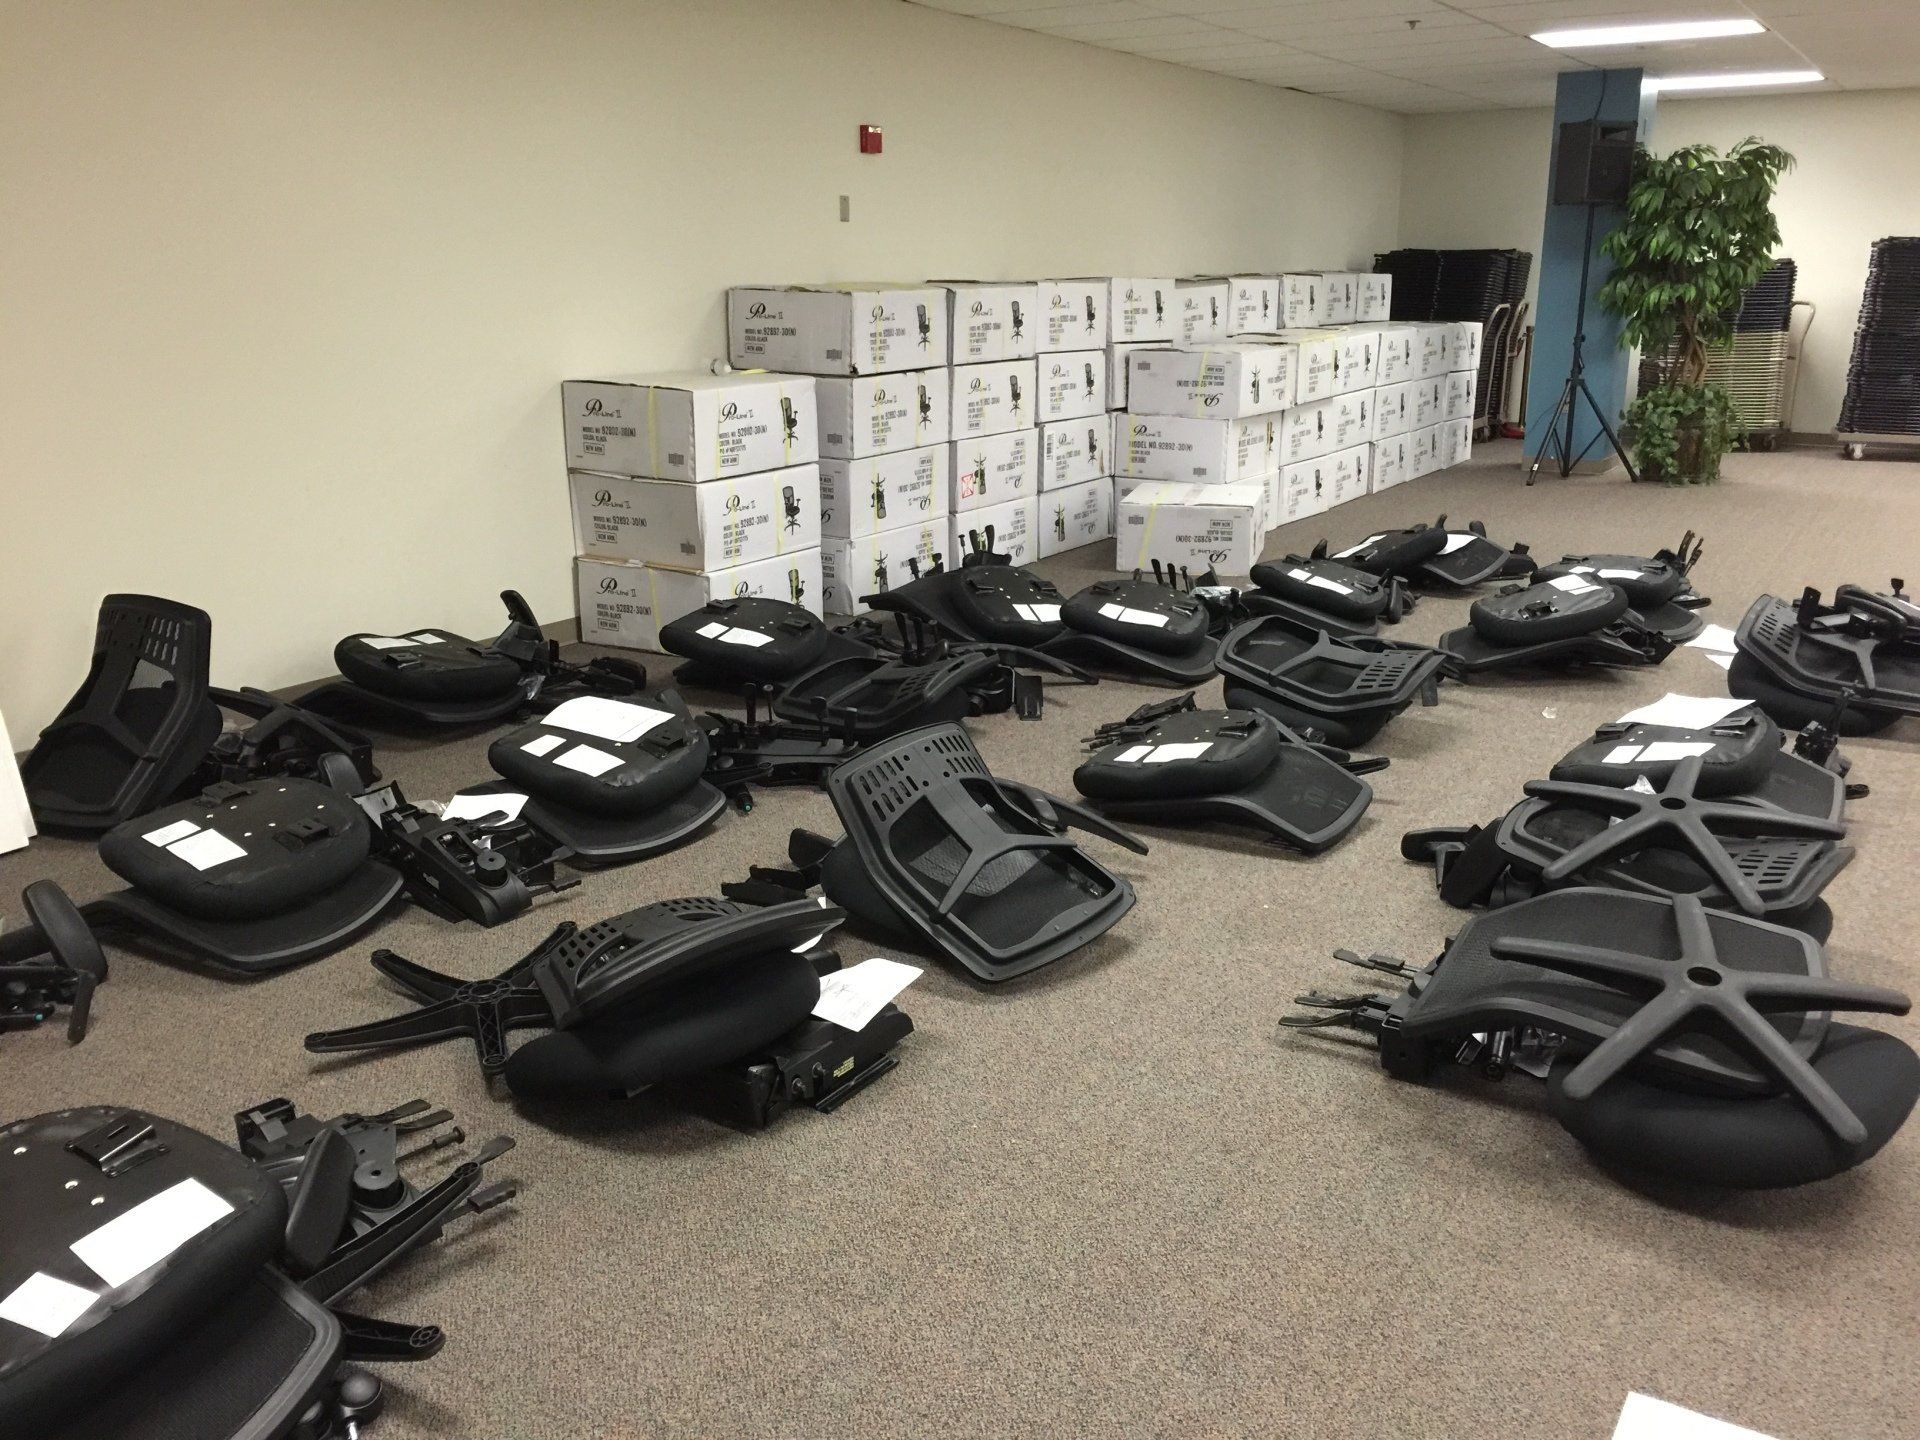 Numerous unpacked office rolling chairs